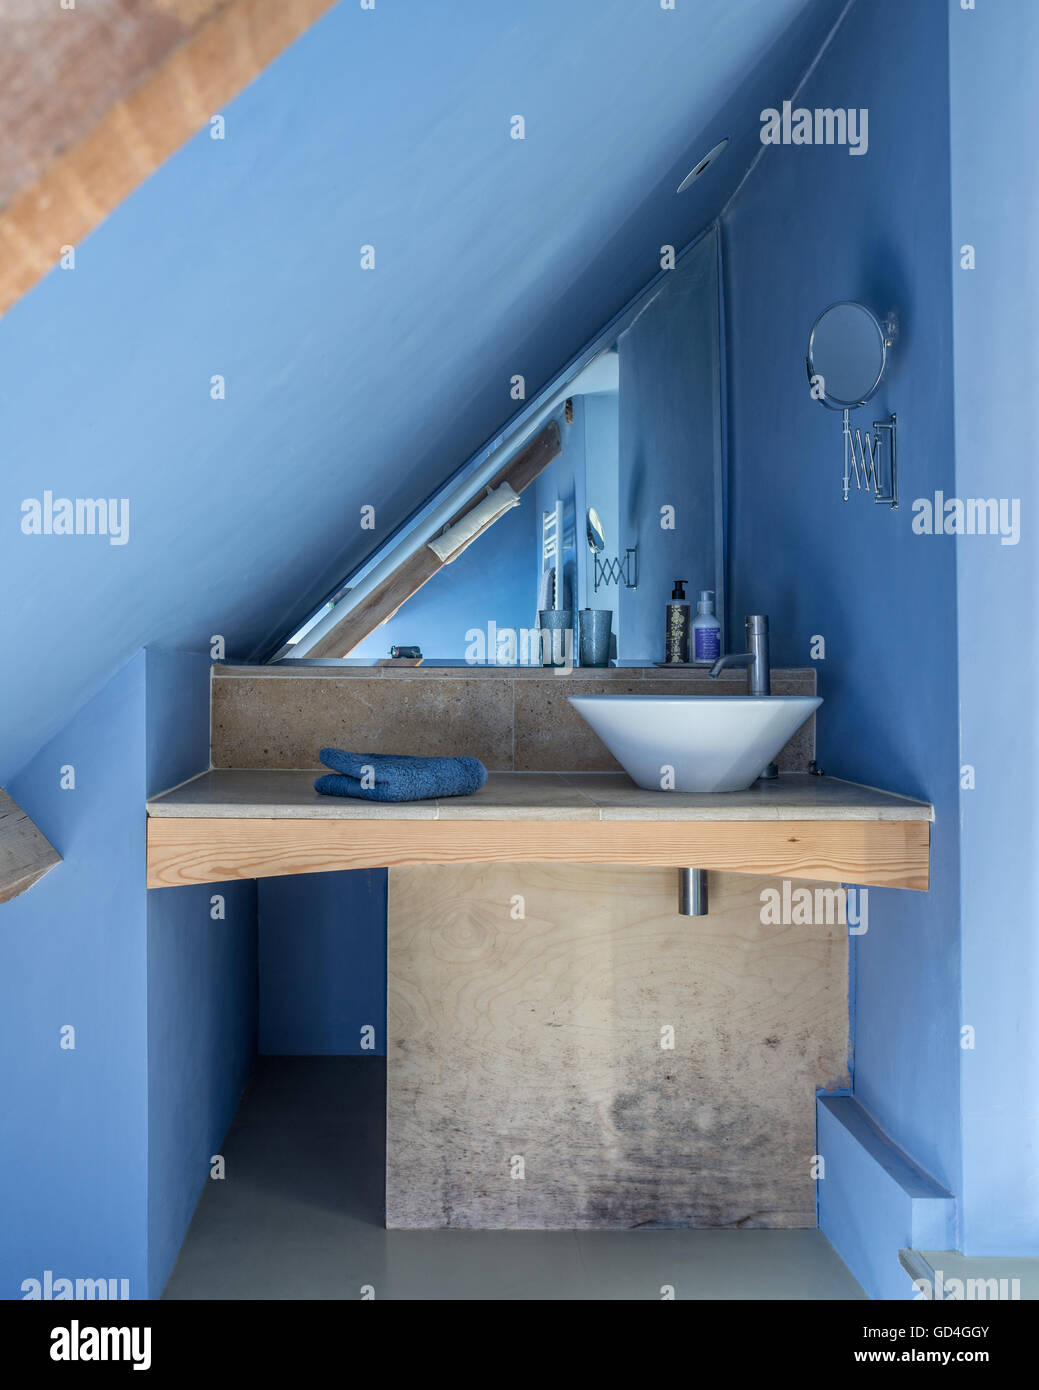 Blue bathroom built under the eaves with purpose built wood units Stock Photo